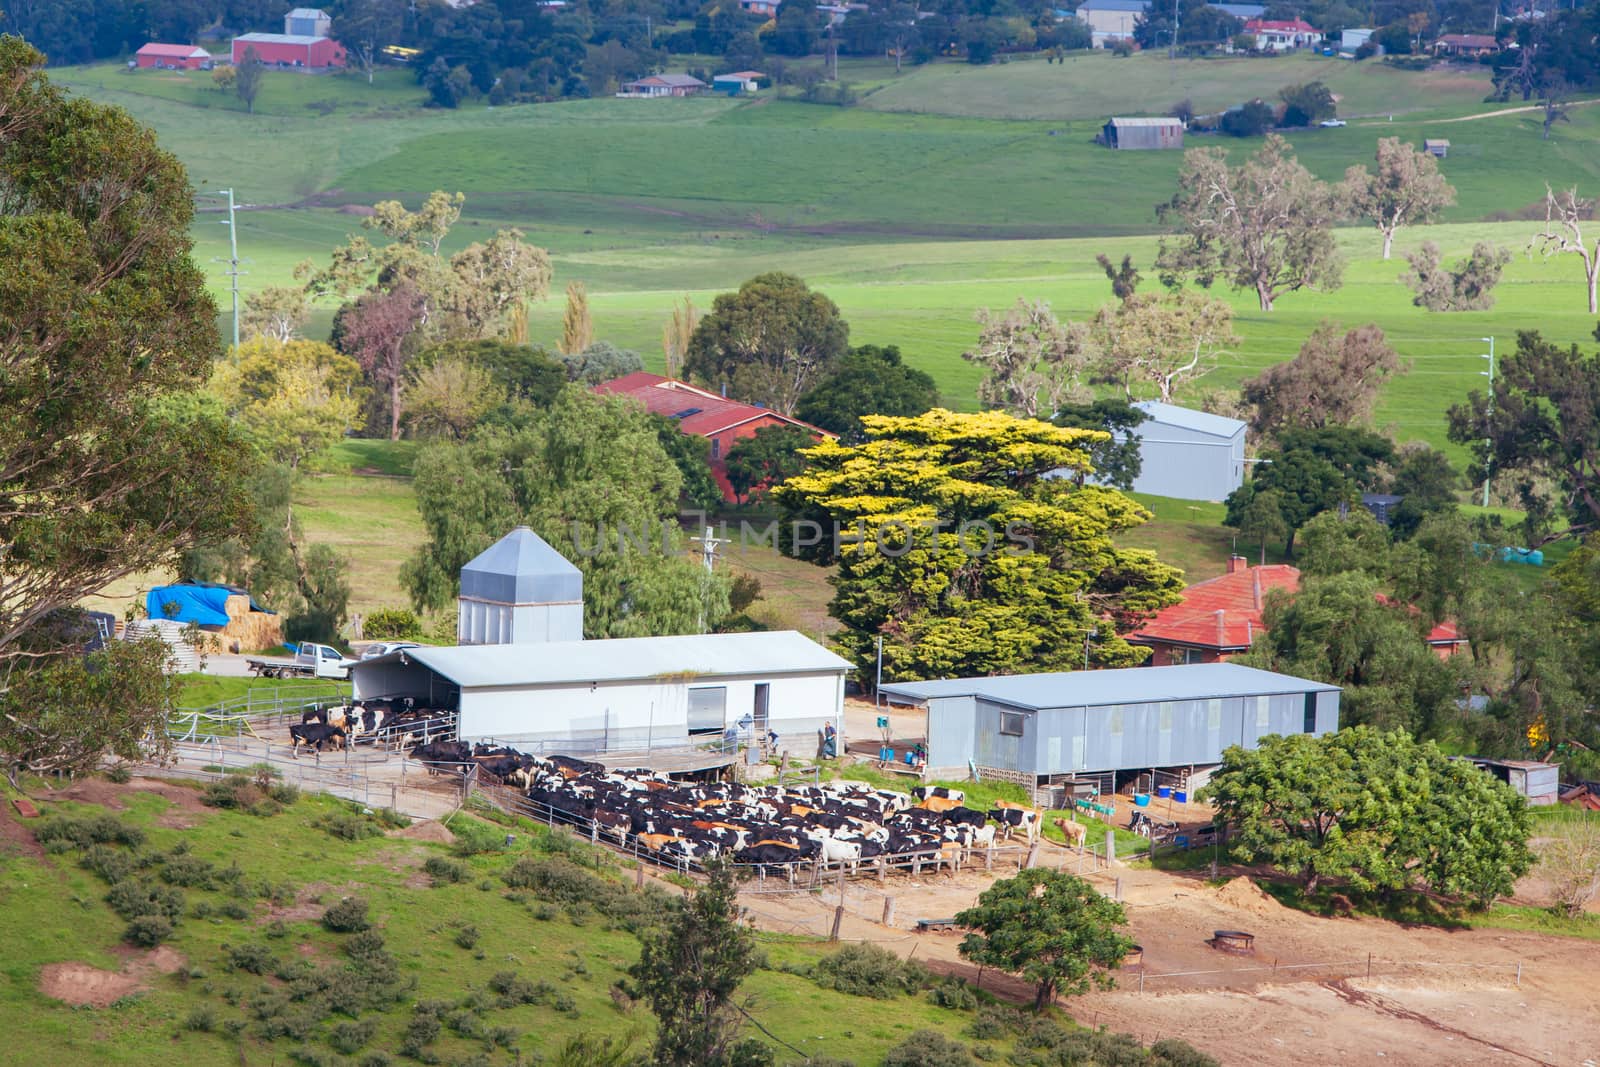 Bega, Australia - April 18 2014: A dairy farm in Bega on a sunny day in New South Wales, Australia